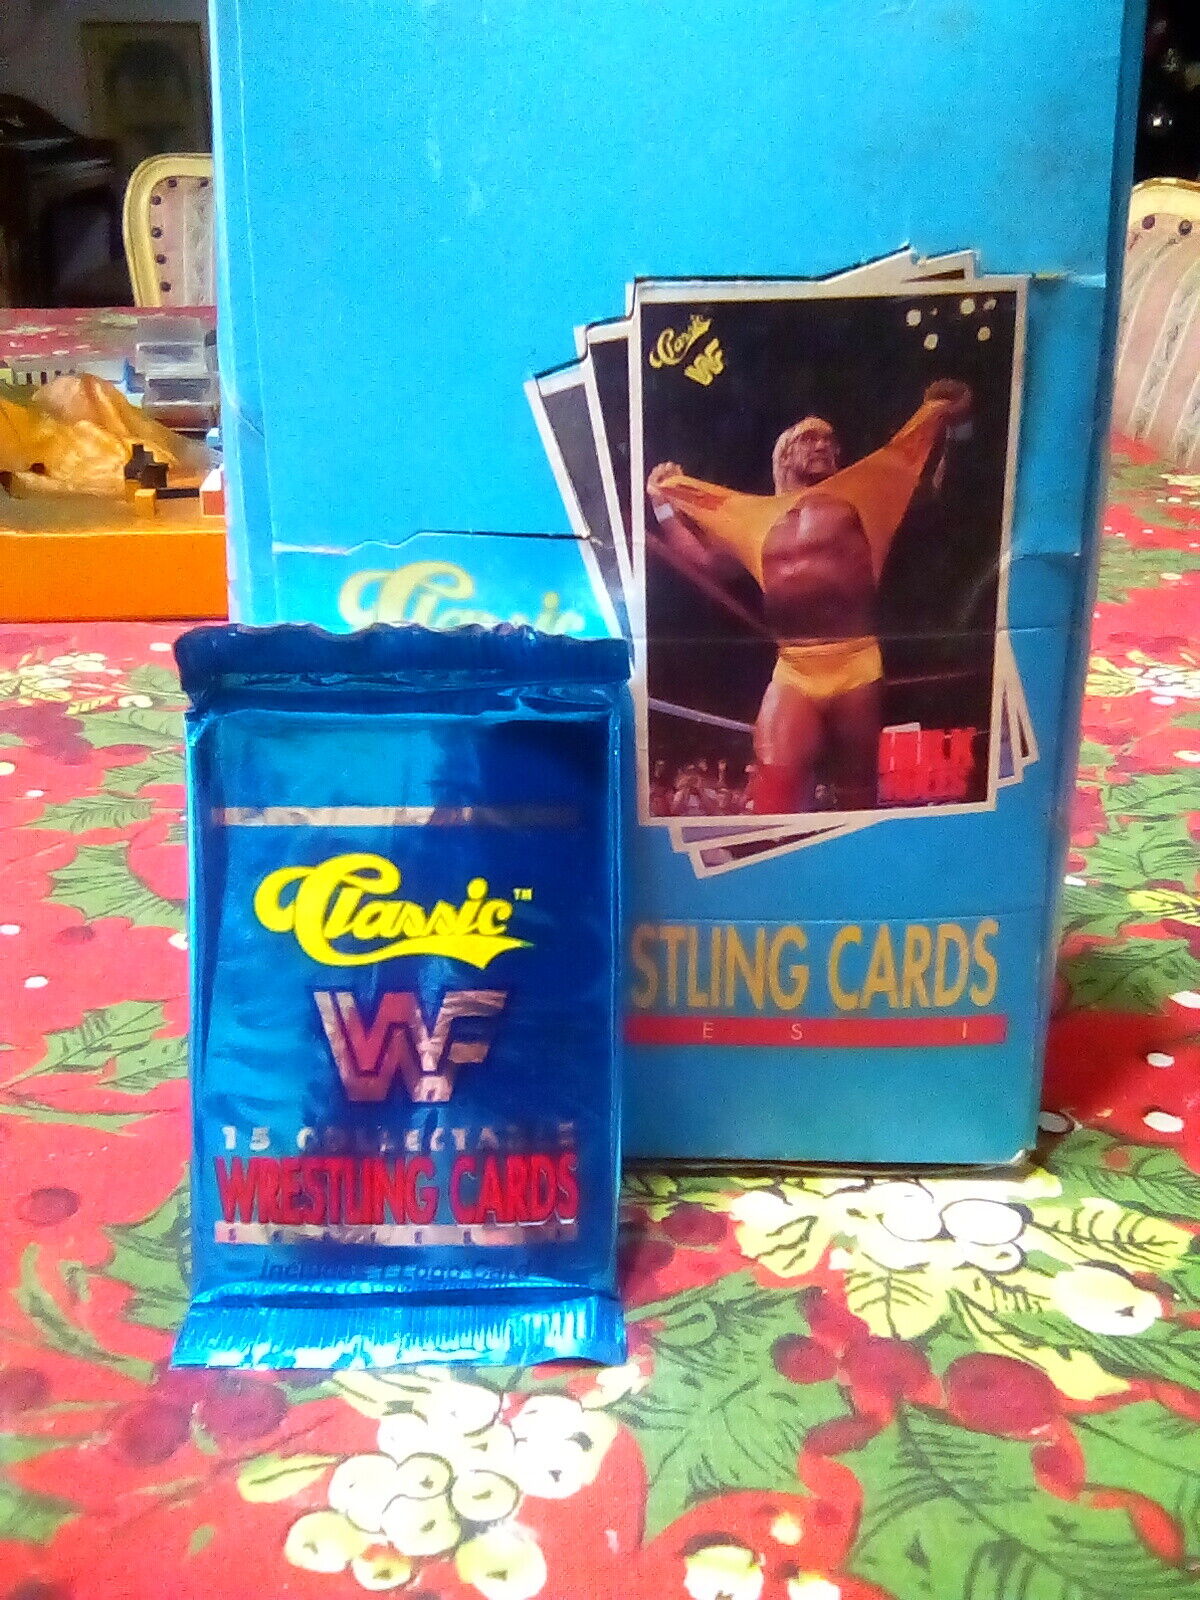 Classic Wwf Wwe World Wrestling Federation Trading Cards Lot 1 Wax Pack 1990 NEW